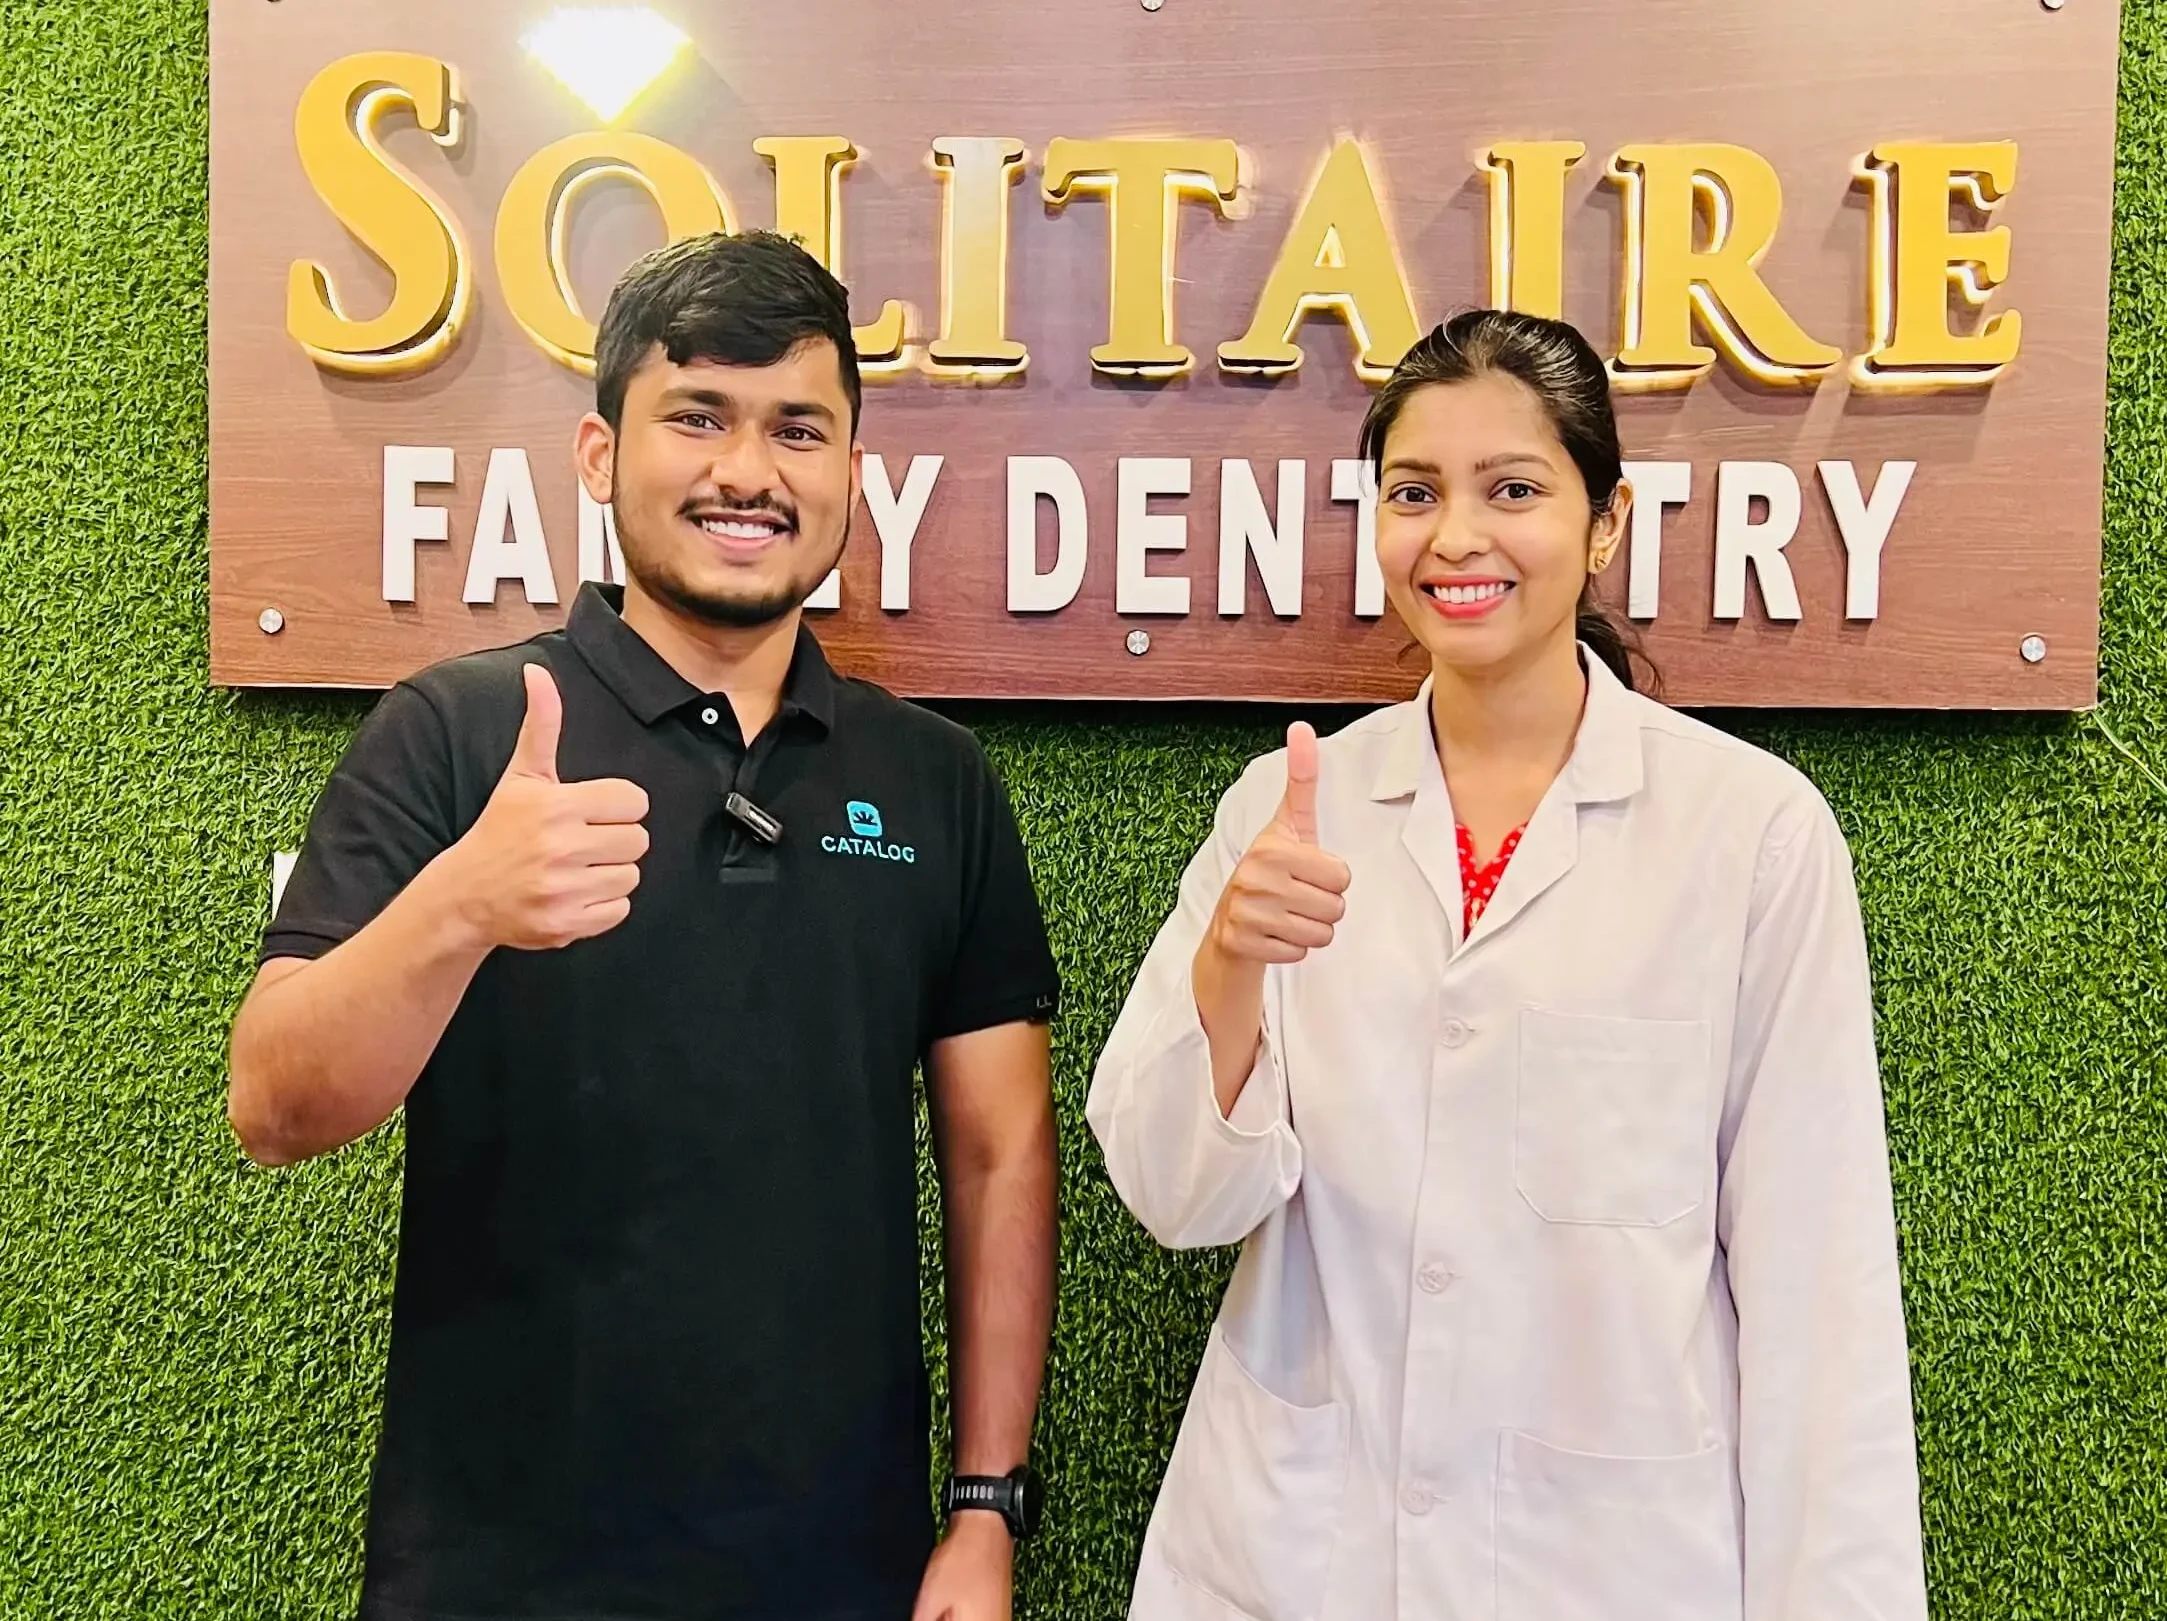 Patient 1 Dental Clinic in Hitech City Solitaire Family Dentistry High Tech City Branch